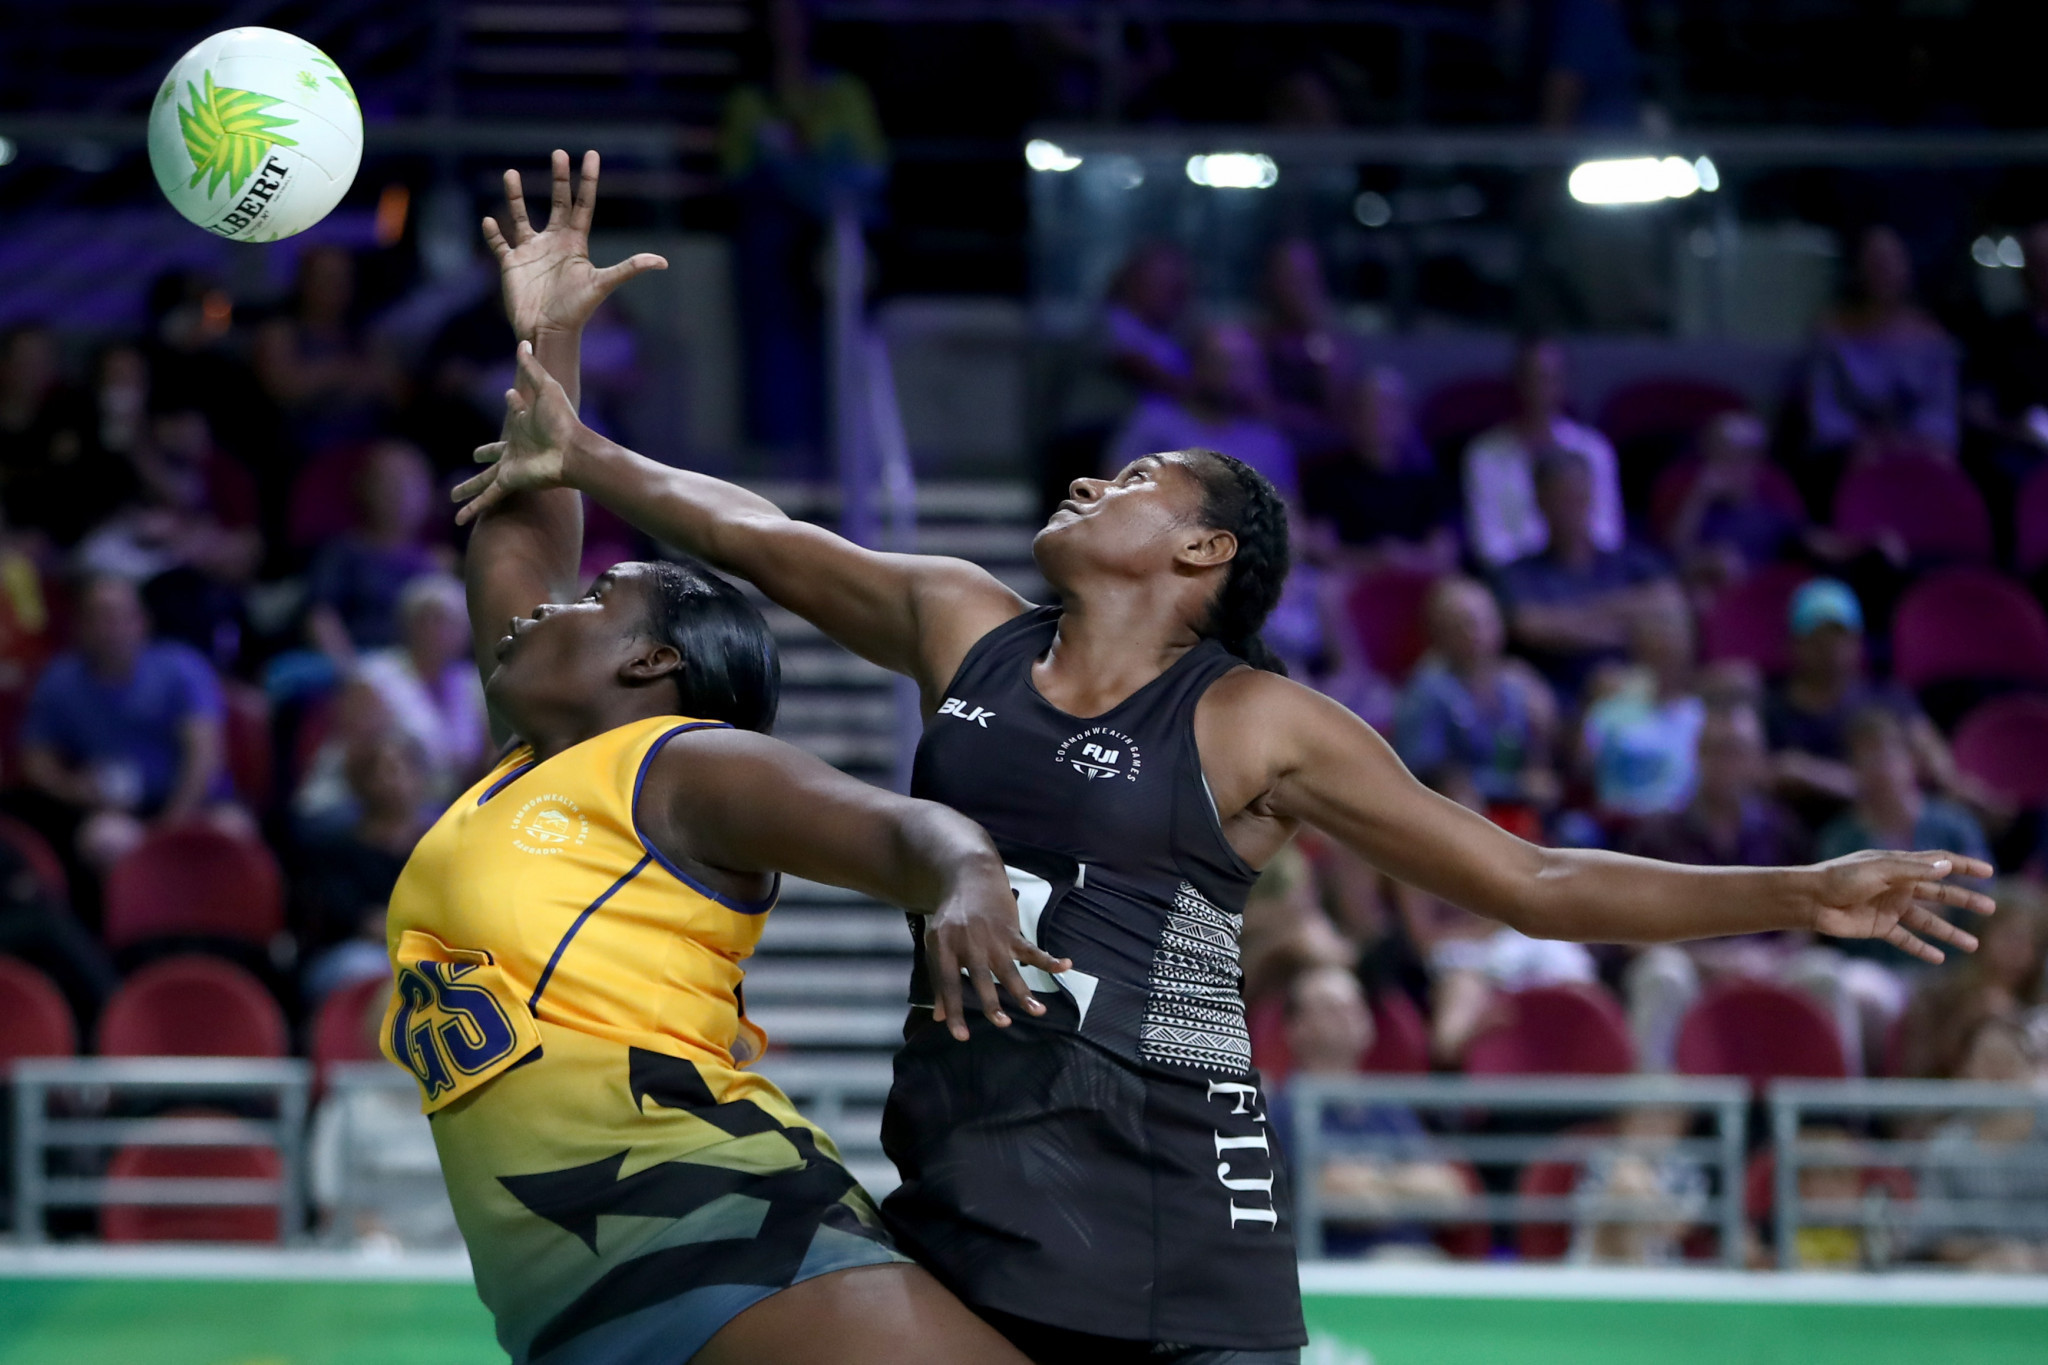 The PacificAus Netball Series will feature African teams for the first time ©Getty Images